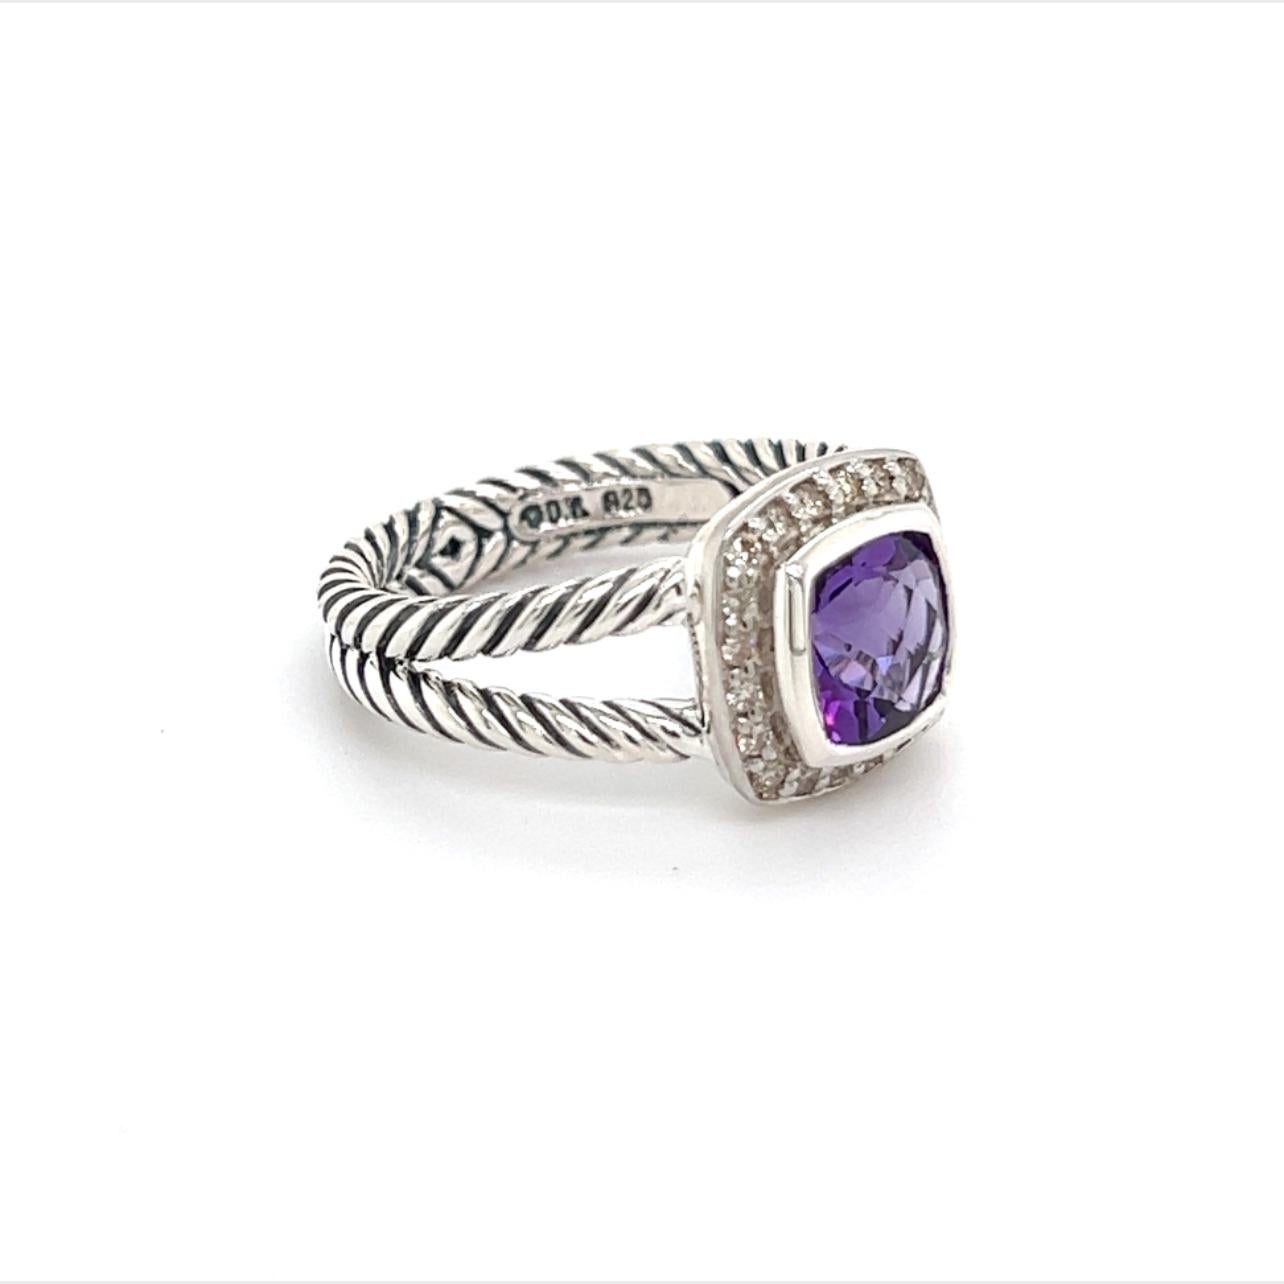 David Yurman Authentic Estate Diamond Petite Albion Amethyst Ring Size 7 Sil 1.67 TCW DY187

Retail: $999

Ring from ALBION COLLECTION

This elegant Authentic David Yurman ring is made of sterling silver and has a weight of 5.43 grams.

TRUSTED